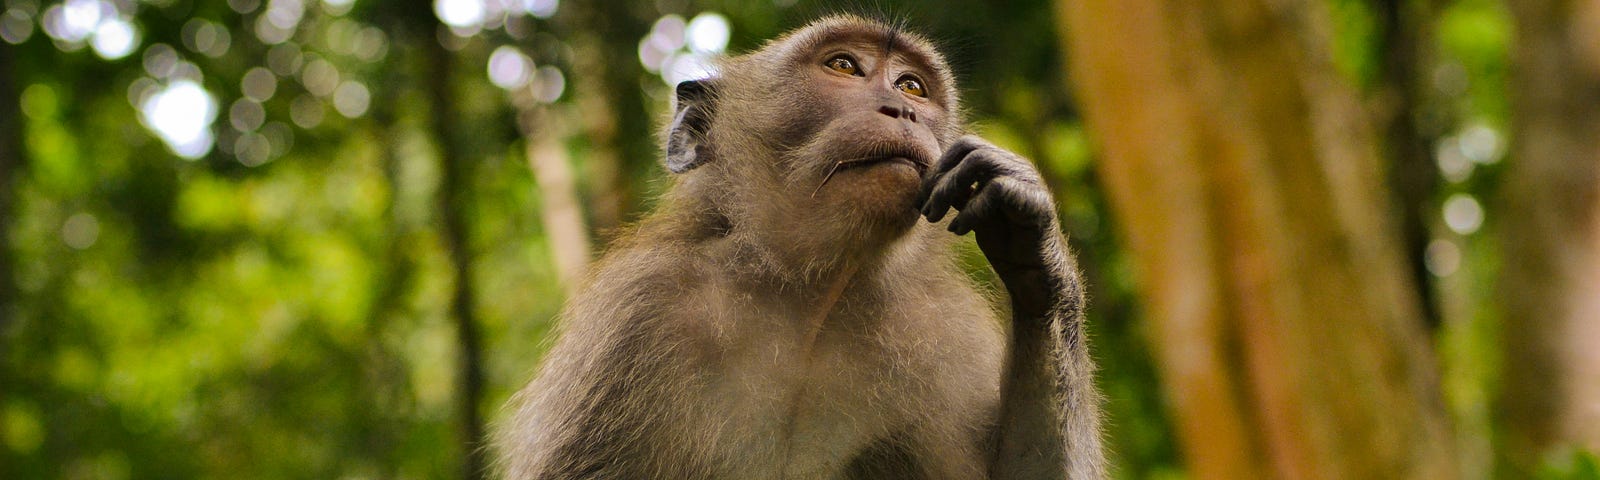 Monkey sitting on a stone in the forest pensive. Thinking and Reality is not the same.